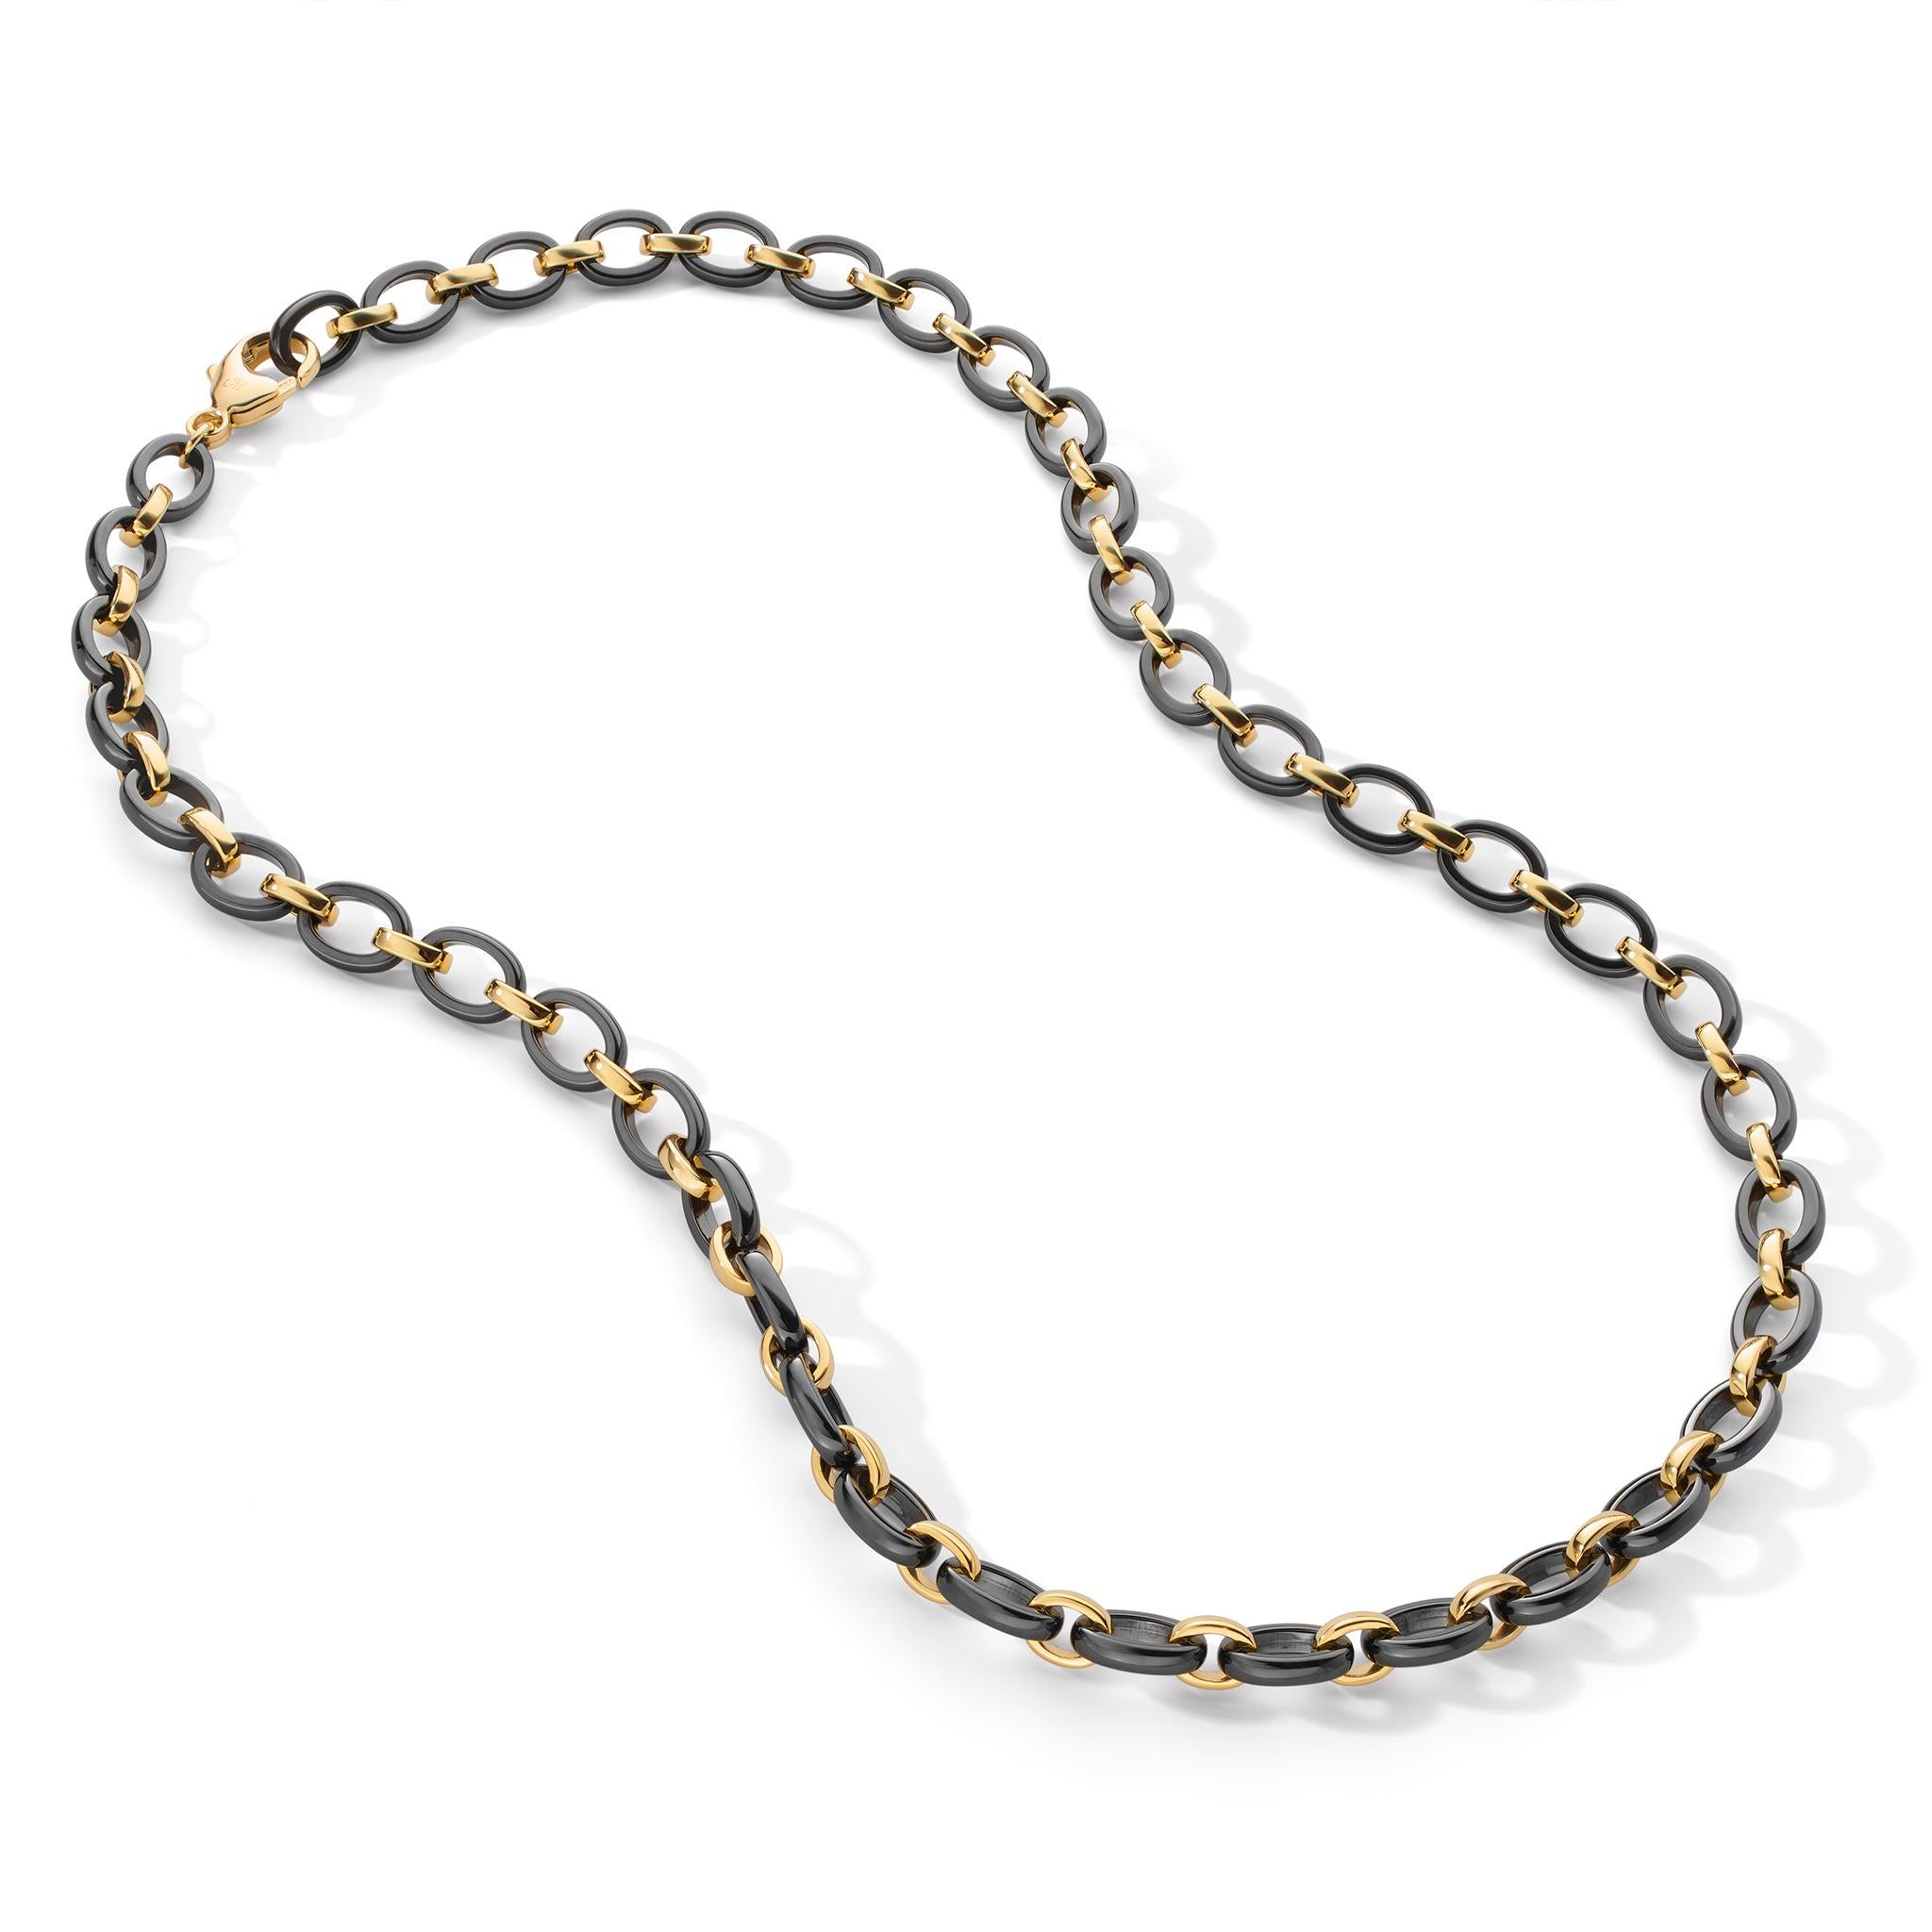 This Monica Rich Kosann alternating link necklace represents the fusion of a 21st century material with the inspirations of a 20th century art deco movement. A perfect statement piece!